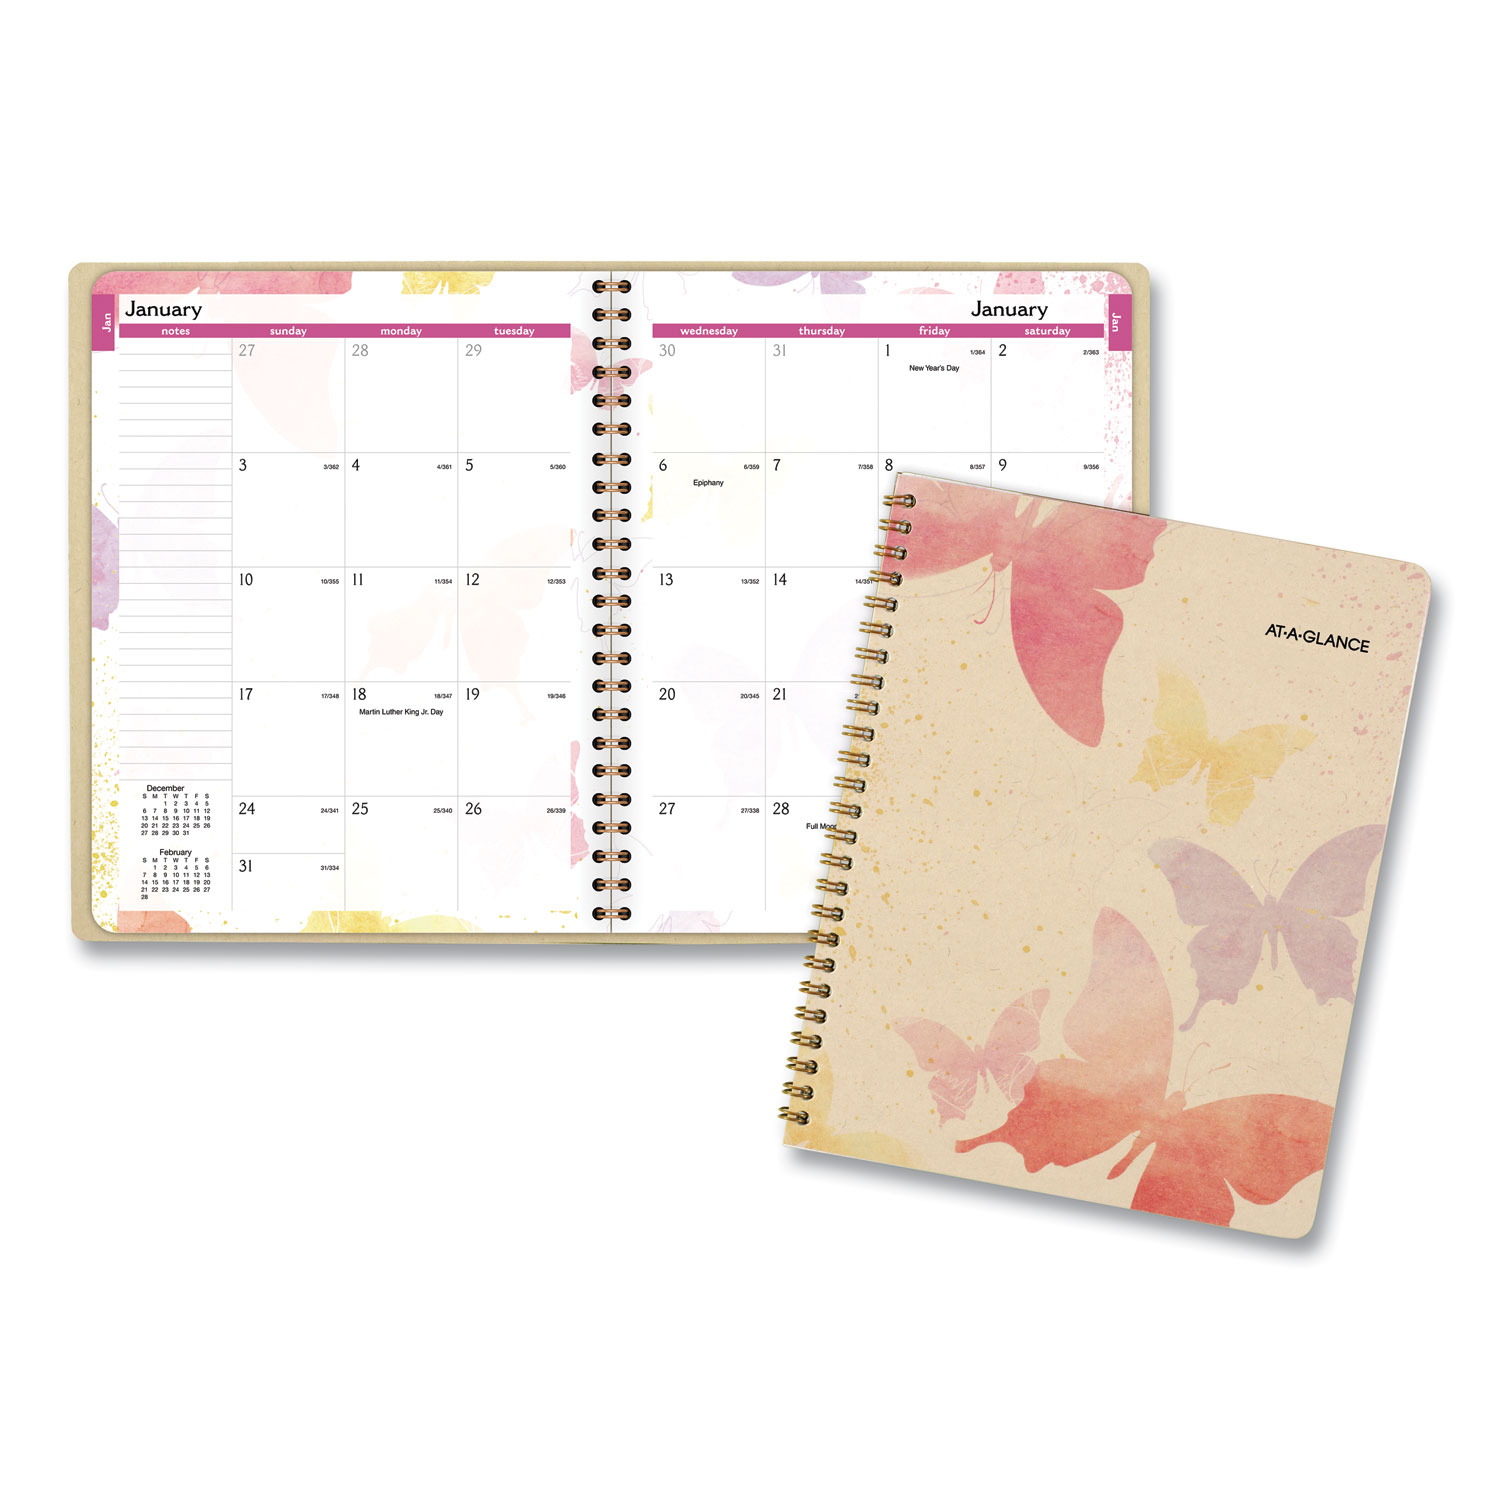  AT-A-GLANCE 791-800G Watercolors Monthly Planner, 8 3/4 x 6 7/8, Watercolors, 2020-2021 (AAG791800G) 